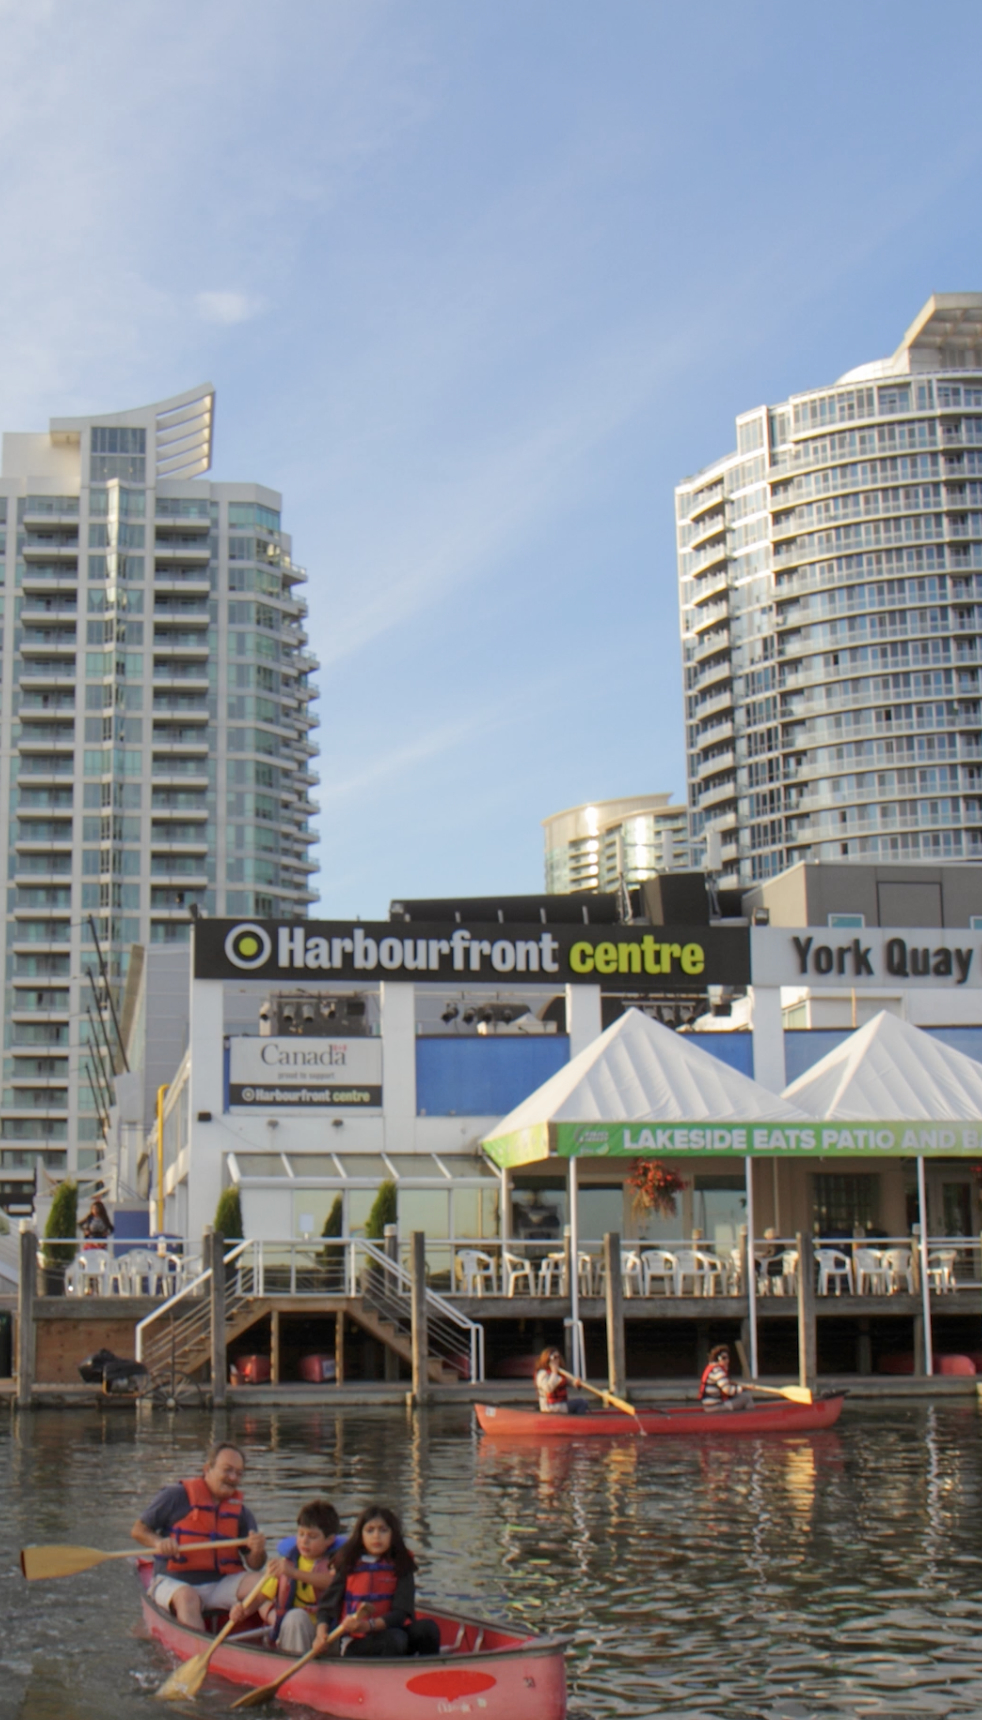 Toronto Harbourfront Centre, behind the lake where groups of people canoe with life jackets on.